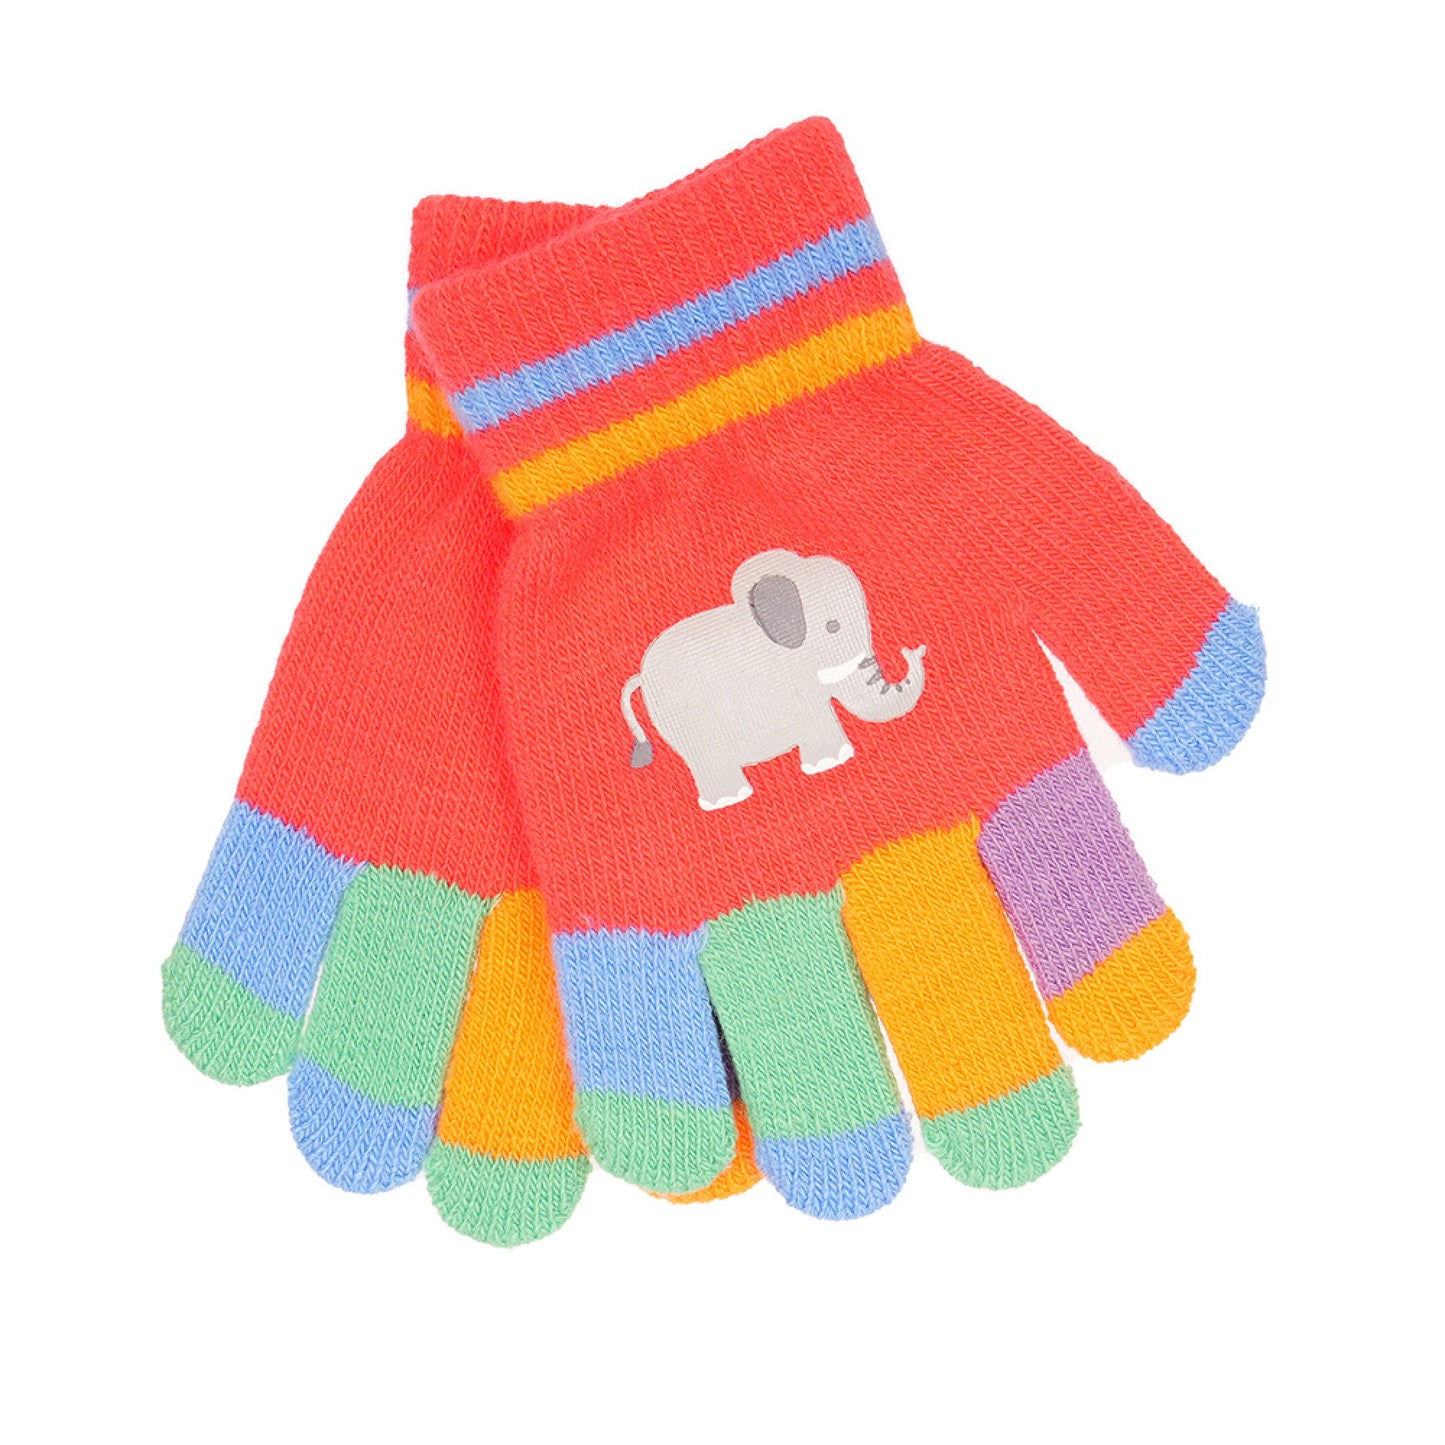 3 Pairs Children's Colourful Striped Thermal Magic Stretch Gloves with Animal Motifs - Elephant, Giraffe, Zebra